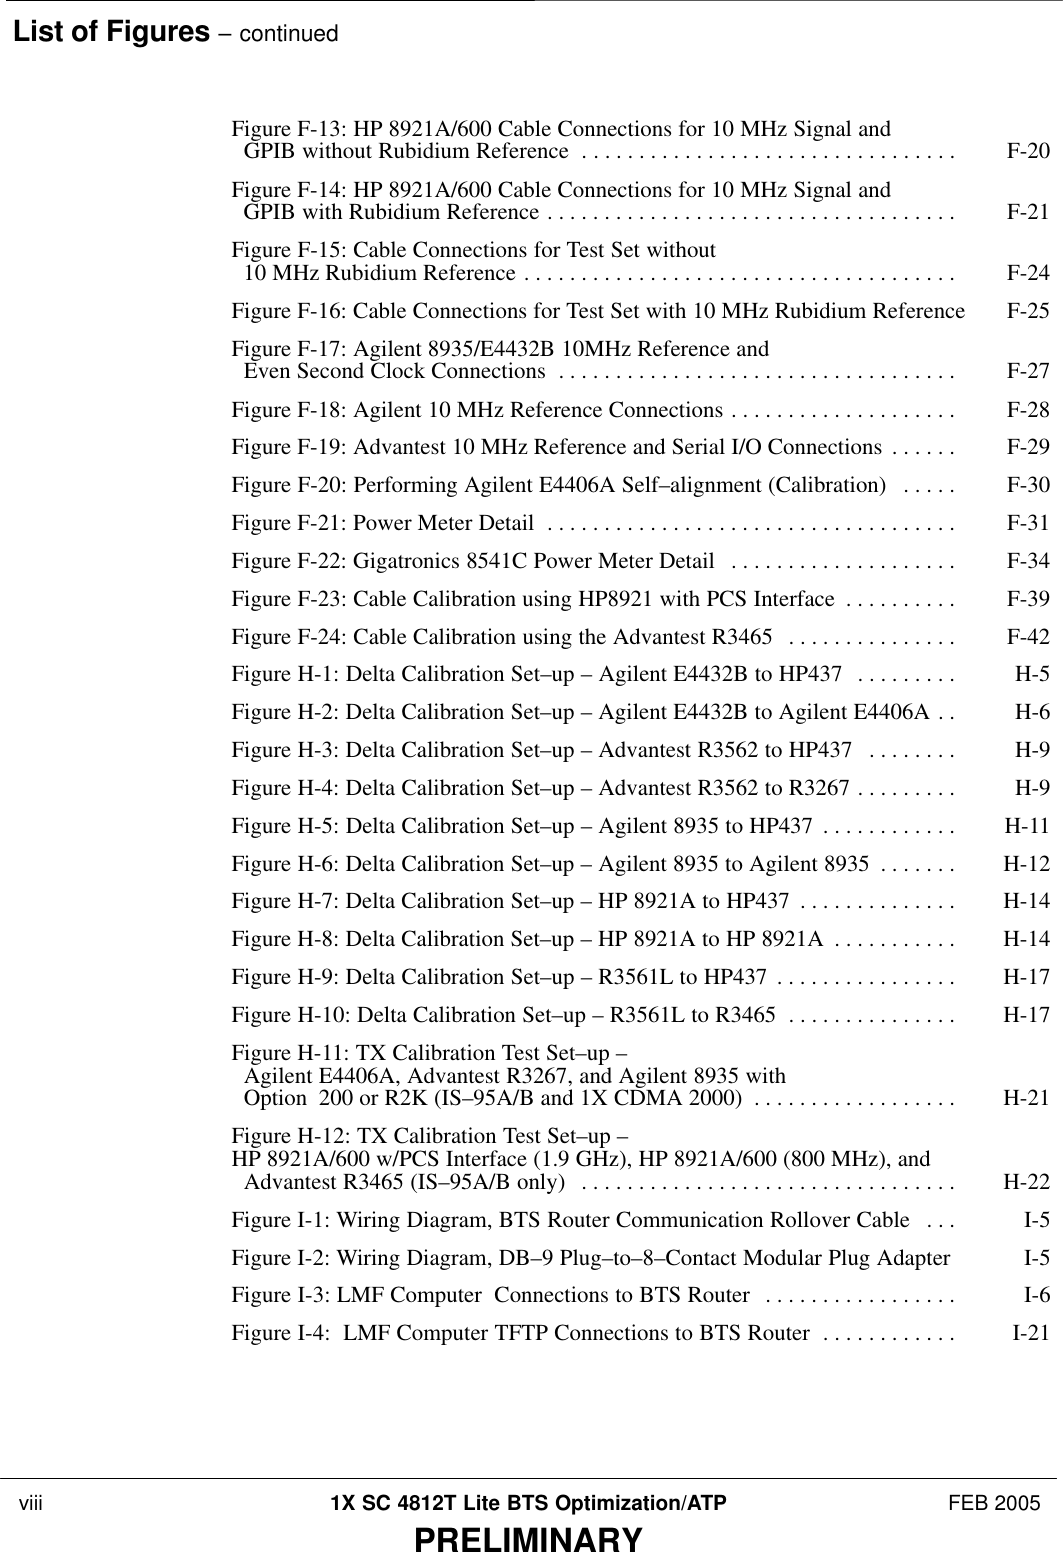 List of Figures – continued viii 1X SC 4812T Lite BTS Optimization/ATP FEB 2005PRELIMINARYFigure F-13: HP 8921A/600 Cable Connections for 10 MHz Signal and   GPIB without Rubidium Reference F-20 . . . . . . . . . . . . . . . . . . . . . . . . . . . . . . . . . Figure F-14: HP 8921A/600 Cable Connections for 10 MHz Signal and   GPIB with Rubidium Reference F-21 . . . . . . . . . . . . . . . . . . . . . . . . . . . . . . . . . . . . Figure F-15: Cable Connections for Test Set without   10 MHz Rubidium Reference F-24 . . . . . . . . . . . . . . . . . . . . . . . . . . . . . . . . . . . . . . Figure F-16: Cable Connections for Test Set with 10 MHz Rubidium Reference F-25 Figure F-17: Agilent 8935/E4432B 10MHz Reference and   Even Second Clock Connections F-27 . . . . . . . . . . . . . . . . . . . . . . . . . . . . . . . . . . . Figure F-18: Agilent 10 MHz Reference Connections F-28 . . . . . . . . . . . . . . . . . . . . Figure F-19: Advantest 10 MHz Reference and Serial I/O Connections F-29 . . . . . . Figure F-20: Performing Agilent E4406A Self–alignment (Calibration) F-30 . . . . . Figure F-21: Power Meter Detail F-31 . . . . . . . . . . . . . . . . . . . . . . . . . . . . . . . . . . . . Figure F-22: Gigatronics 8541C Power Meter Detail F-34 . . . . . . . . . . . . . . . . . . . . Figure F-23: Cable Calibration using HP8921 with PCS Interface F-39 . . . . . . . . . . Figure F-24: Cable Calibration using the Advantest R3465 F-42 . . . . . . . . . . . . . . . Figure H-1: Delta Calibration Set–up – Agilent E4432B to HP437 H-5 . . . . . . . . . Figure H-2: Delta Calibration Set–up – Agilent E4432B to Agilent E4406A H-6 . . Figure H-3: Delta Calibration Set–up – Advantest R3562 to HP437 H-9 . . . . . . . . Figure H-4: Delta Calibration Set–up – Advantest R3562 to R3267 H-9 . . . . . . . . . Figure H-5: Delta Calibration Set–up – Agilent 8935 to HP437 H-11 . . . . . . . . . . . . Figure H-6: Delta Calibration Set–up – Agilent 8935 to Agilent 8935 H-12 . . . . . . . Figure H-7: Delta Calibration Set–up – HP 8921A to HP437 H-14 . . . . . . . . . . . . . . Figure H-8: Delta Calibration Set–up – HP 8921A to HP 8921A H-14 . . . . . . . . . . . Figure H-9: Delta Calibration Set–up – R3561L to HP437 H-17 . . . . . . . . . . . . . . . . Figure H-10: Delta Calibration Set–up – R3561L to R3465 H-17 . . . . . . . . . . . . . . . Figure H-11: TX Calibration Test Set–up –   Agilent E4406A, Advantest R3267, and Agilent 8935 with   Option 200 or R2K (IS–95A/B and 1X CDMA 2000) H-21 . . . . . . . . . . . . . . . . . . Figure H-12: TX Calibration Test Set–up – HP 8921A/600 w/PCS Interface (1.9 GHz), HP 8921A/600 (800 MHz), and   Advantest R3465 (IS–95A/B only) H-22 . . . . . . . . . . . . . . . . . . . . . . . . . . . . . . . . . Figure I-1: Wiring Diagram, BTS Router Communication Rollover Cable I-5 . . . Figure I-2: Wiring Diagram, DB–9 Plug–to–8–Contact Modular Plug Adapter I-5 Figure I-3: LMF Computer  Connections to BTS Router I-6 . . . . . . . . . . . . . . . . . Figure I-4:  LMF Computer TFTP Connections to BTS Router I-21 . . . . . . . . . . . . 